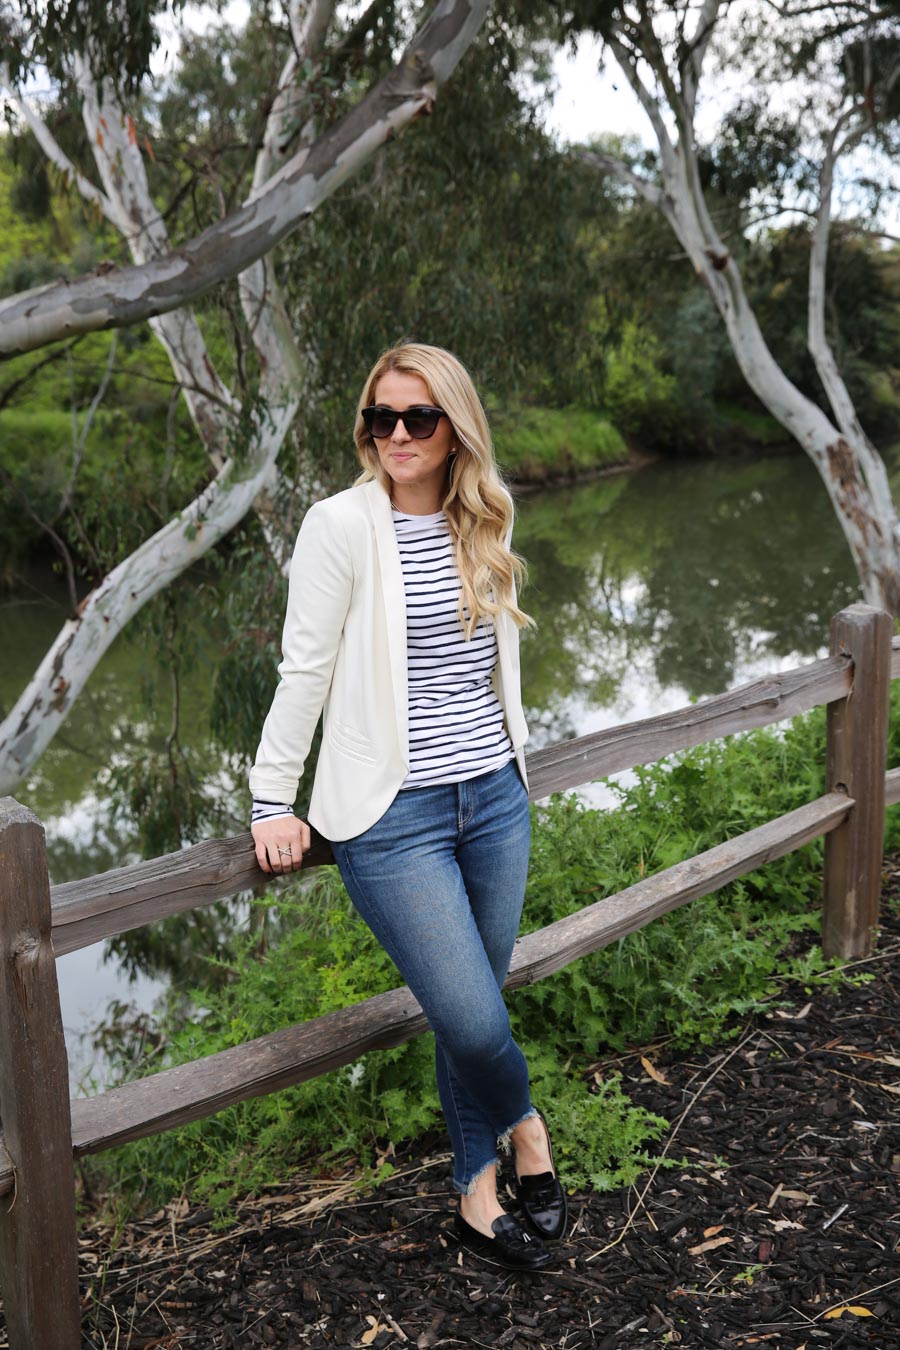 What to Wear in Wine Country - Striped Shirt + Jeans